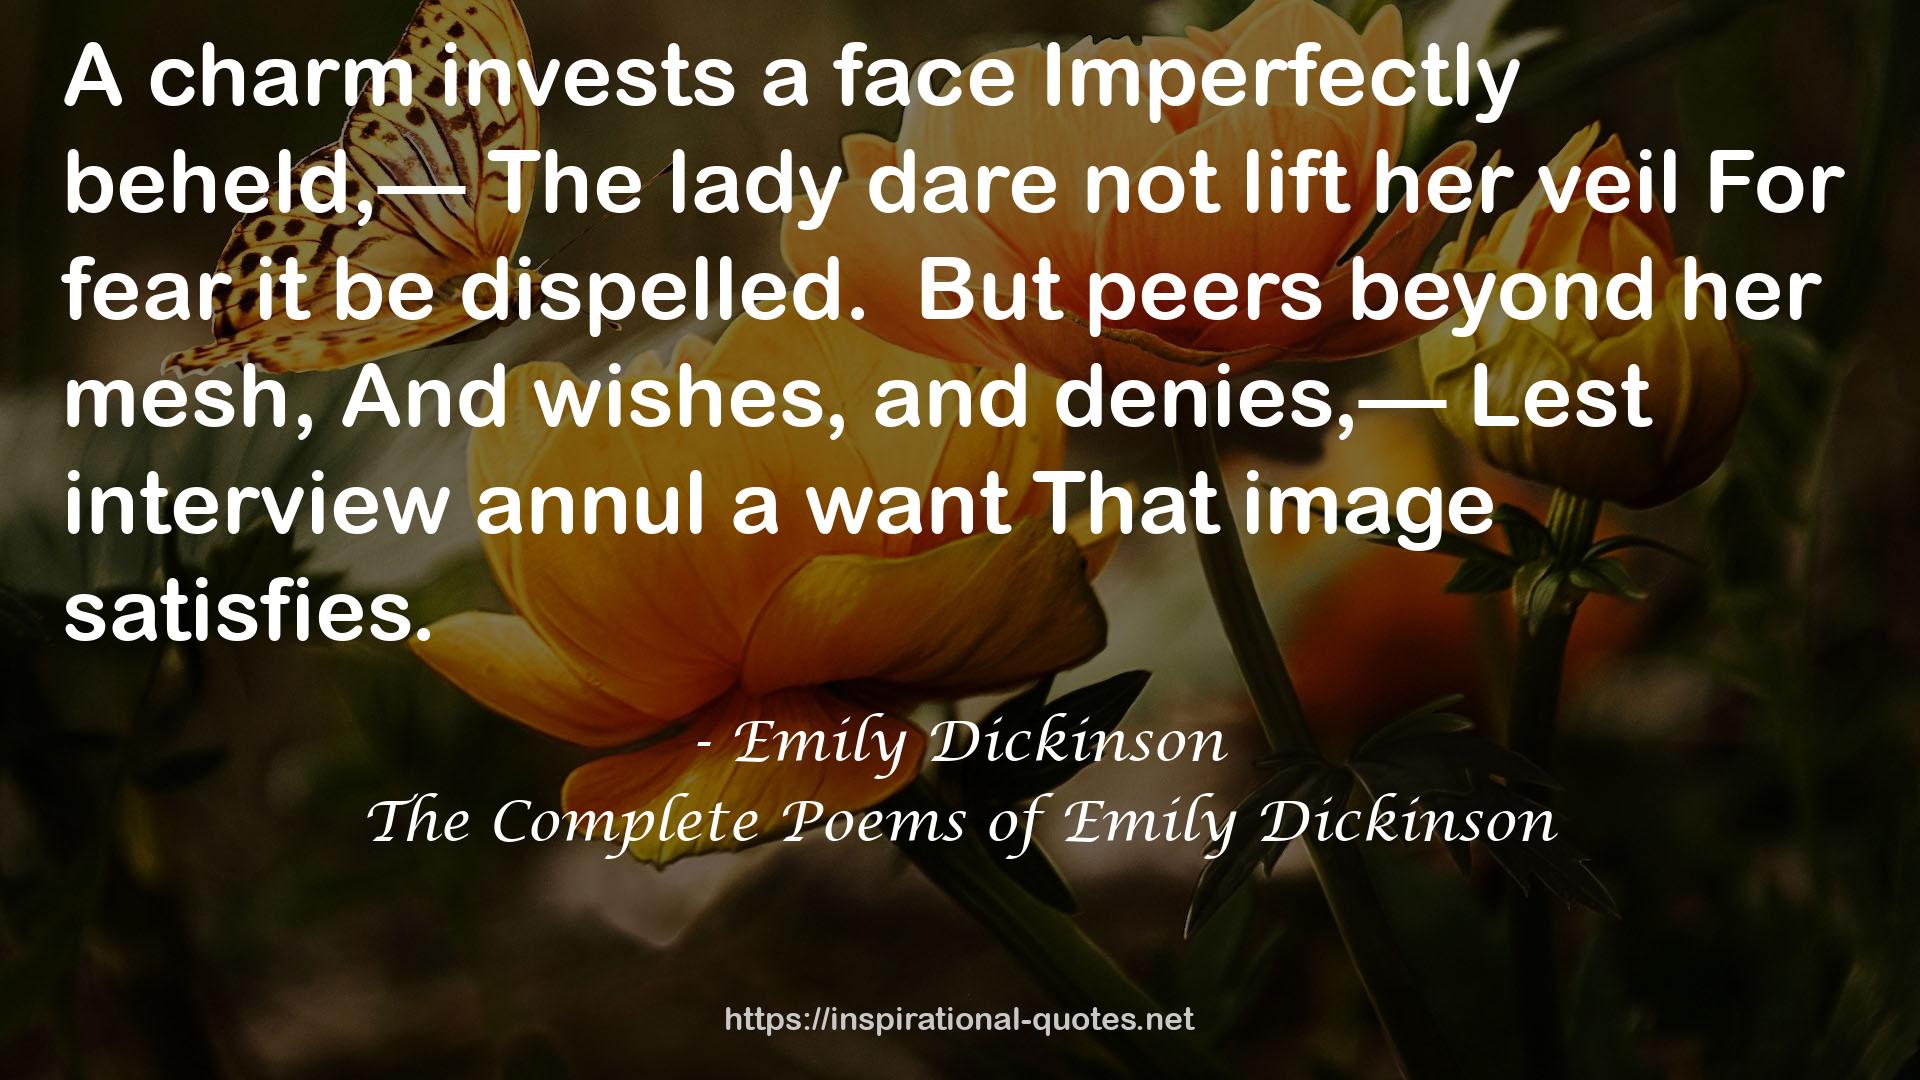 The Complete Poems of Emily Dickinson QUOTES